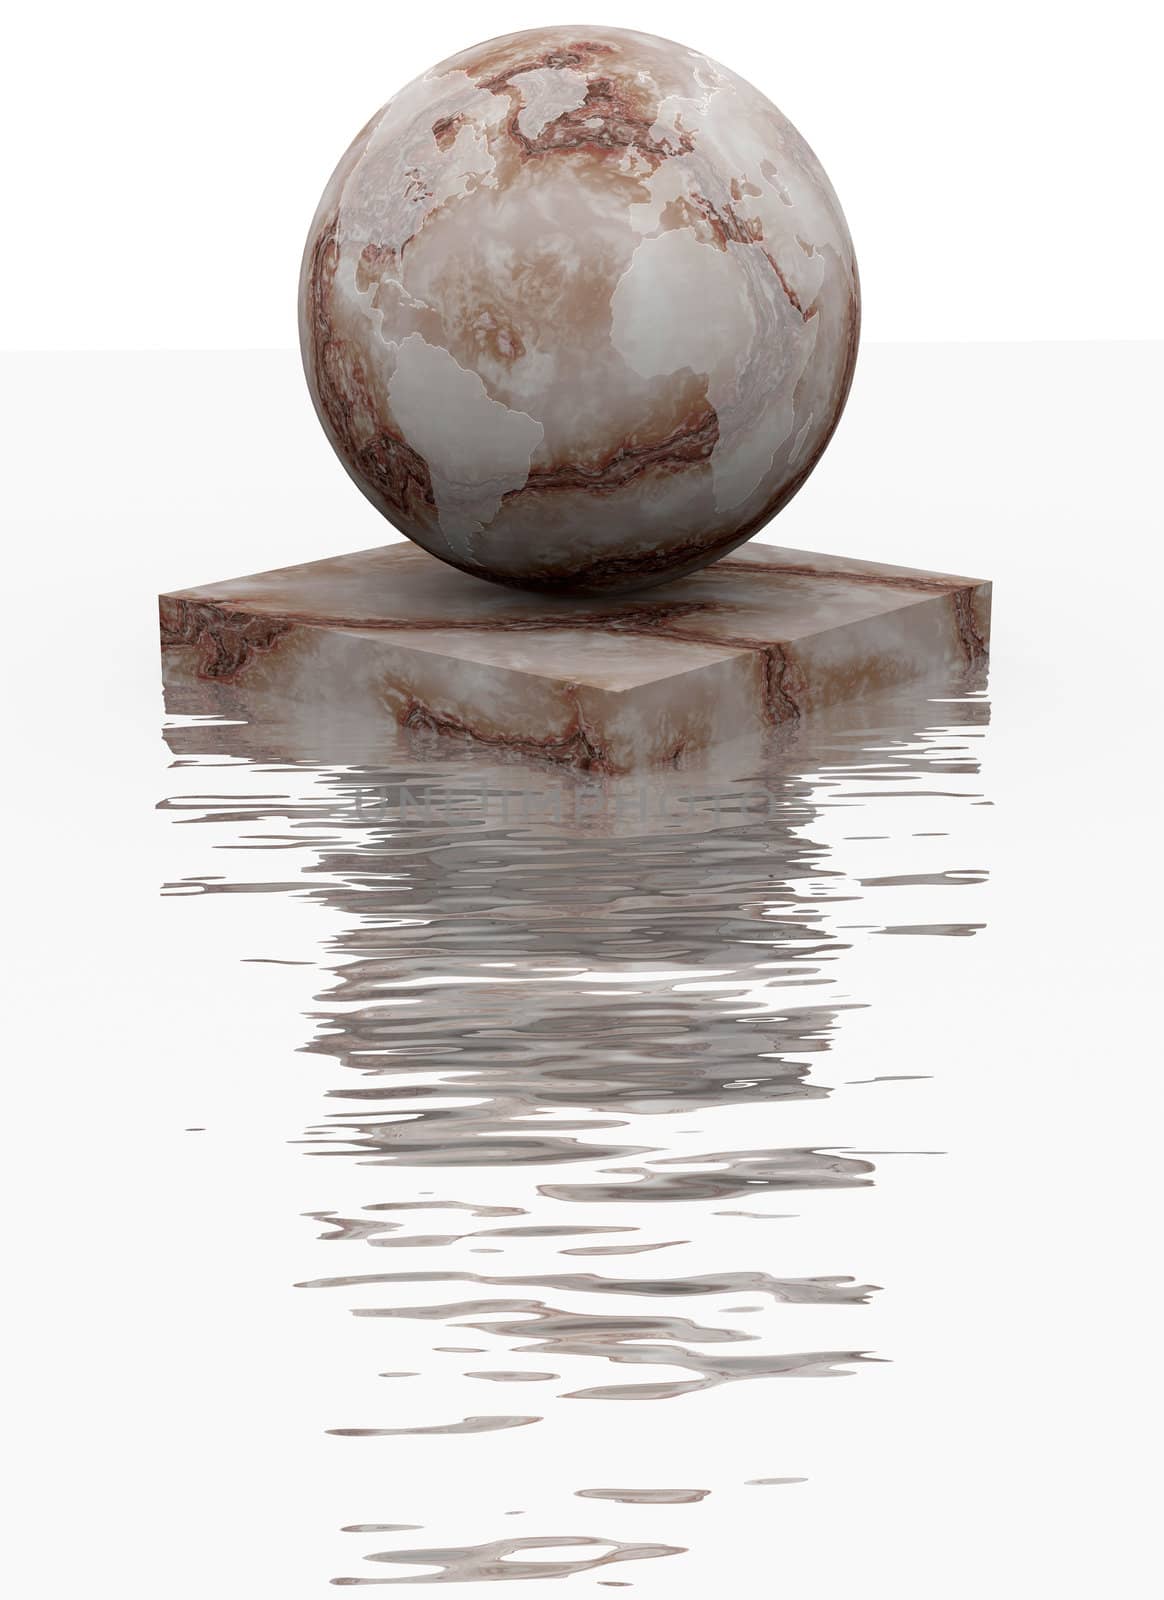 Marble sphere is reflected over water